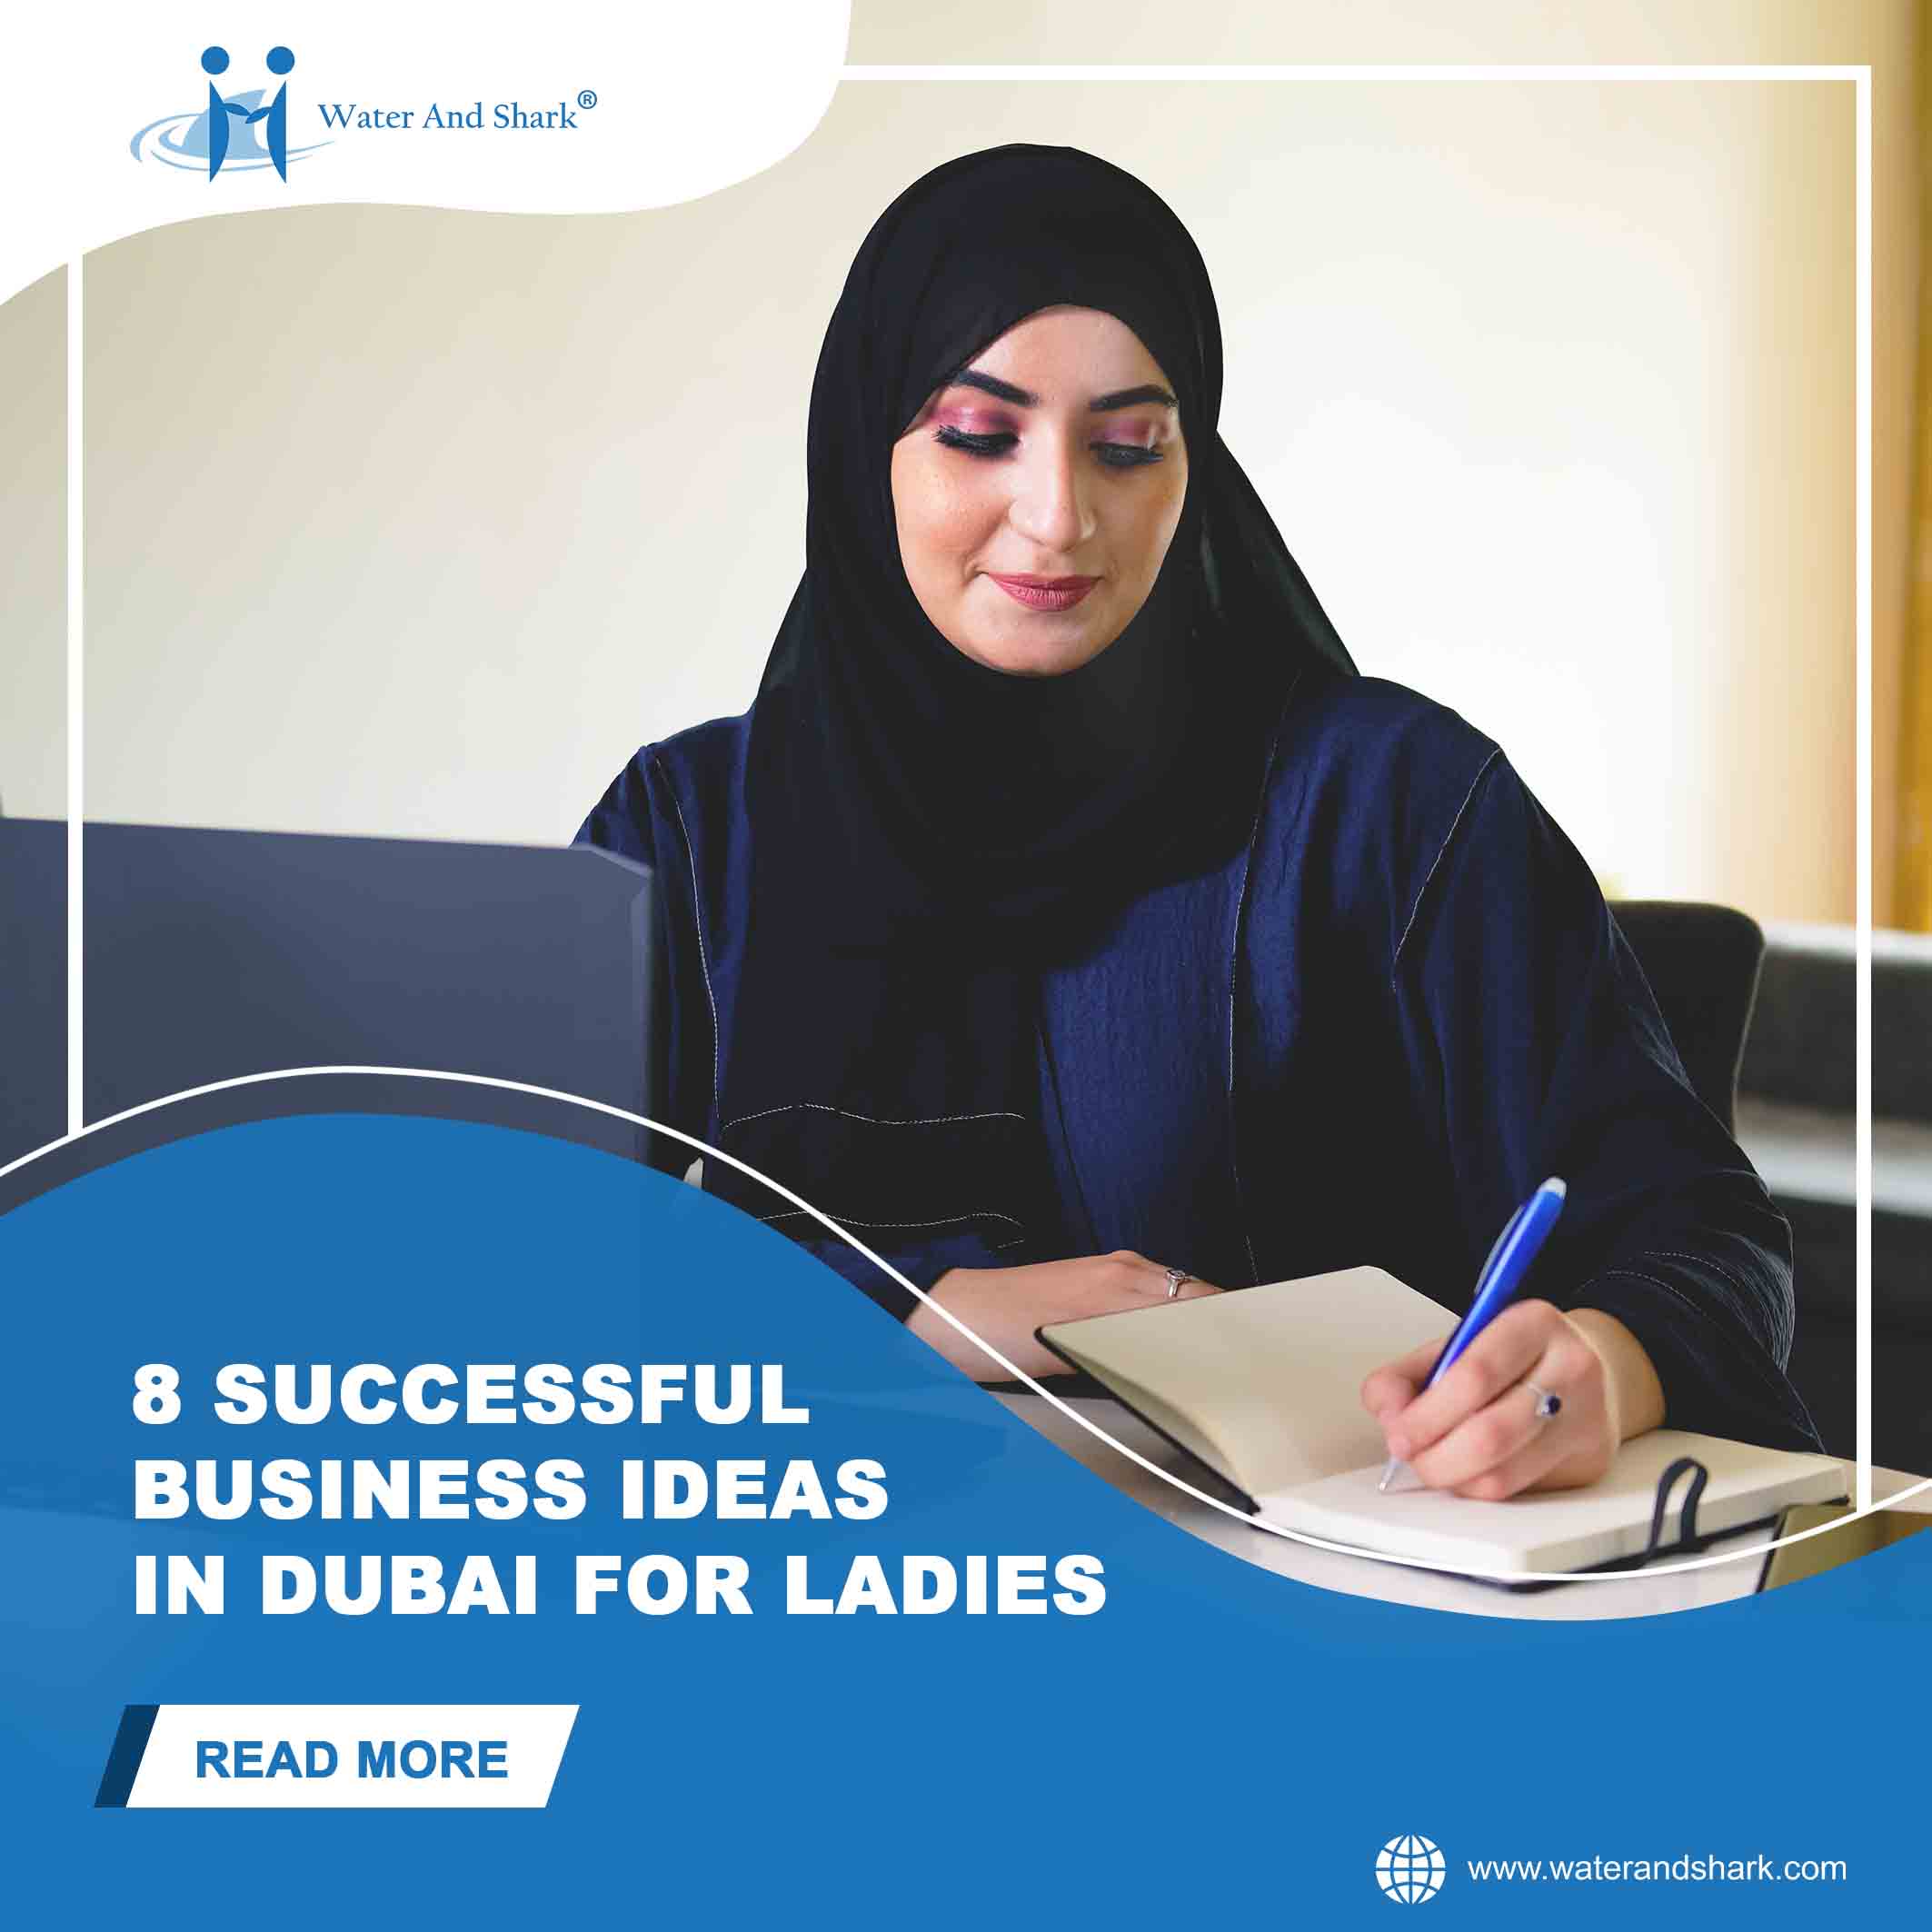 1_x1_8_SUCCESSFUL_BUSINESS_IDEAS_IN_DUBAI_FOR_LADIES_low_size.jpg